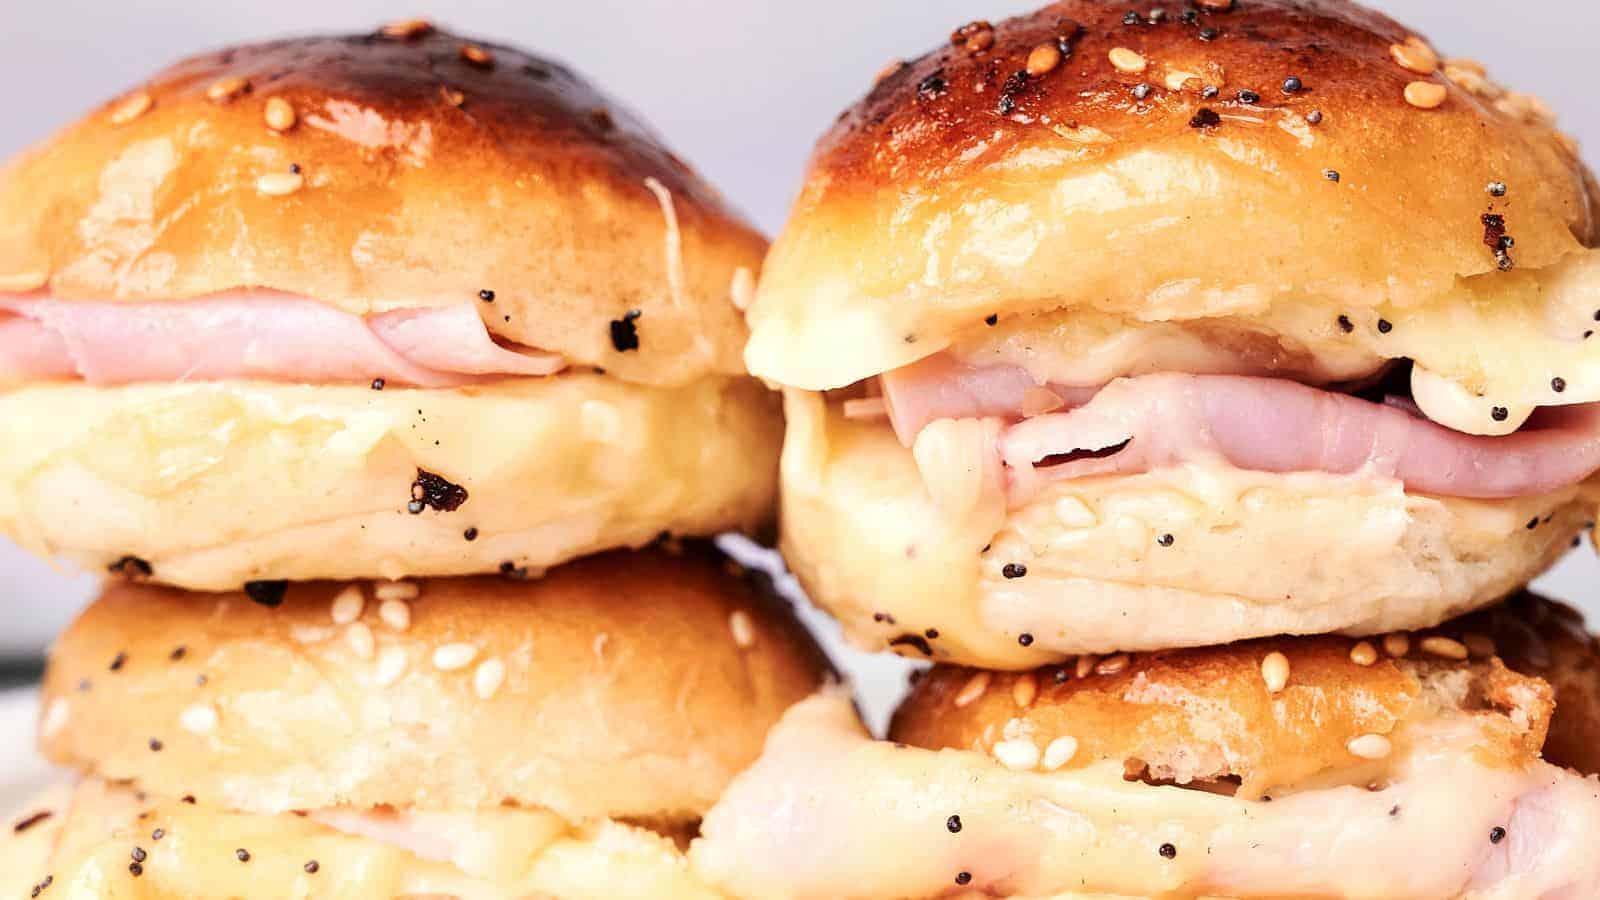 Close-up of four ham and cheese sliders on sesame seed buns, arranged in two stacks. The cheese is melting and oozing out of the sides, making these Ham and Cheese Sliders irresistible.